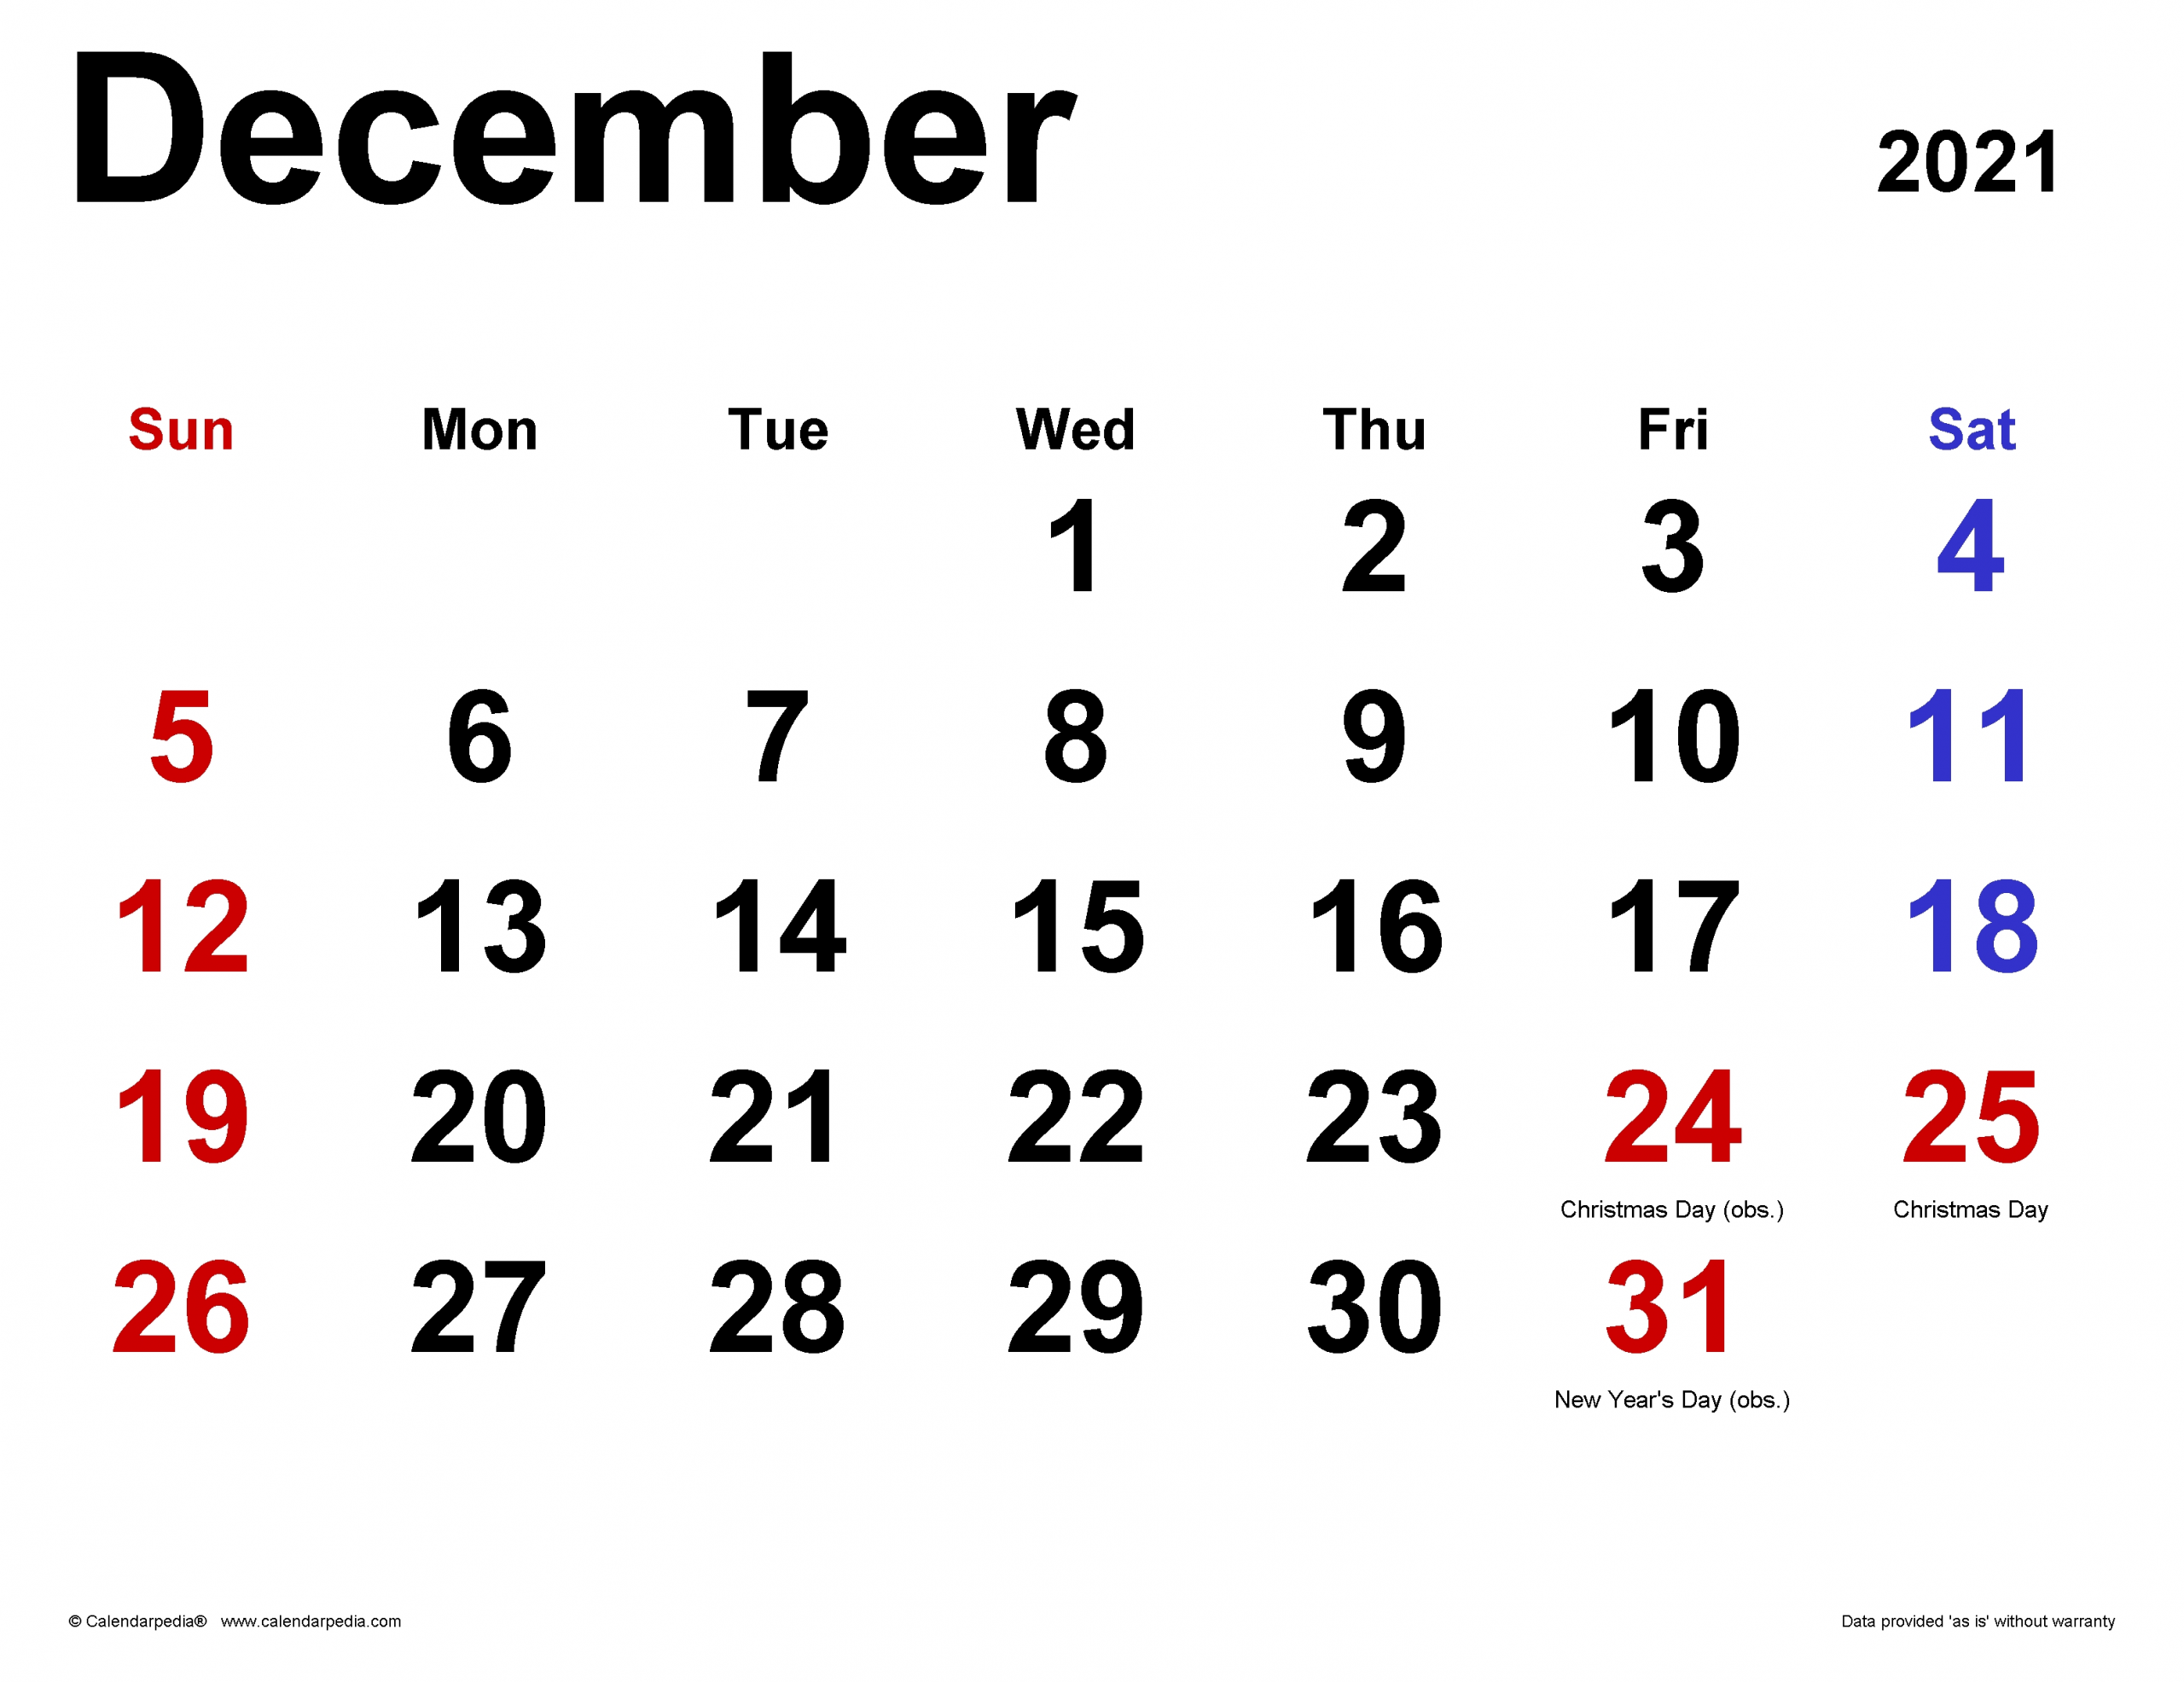 December 2021 Calendar | Templates For Word, Excel And Pdf